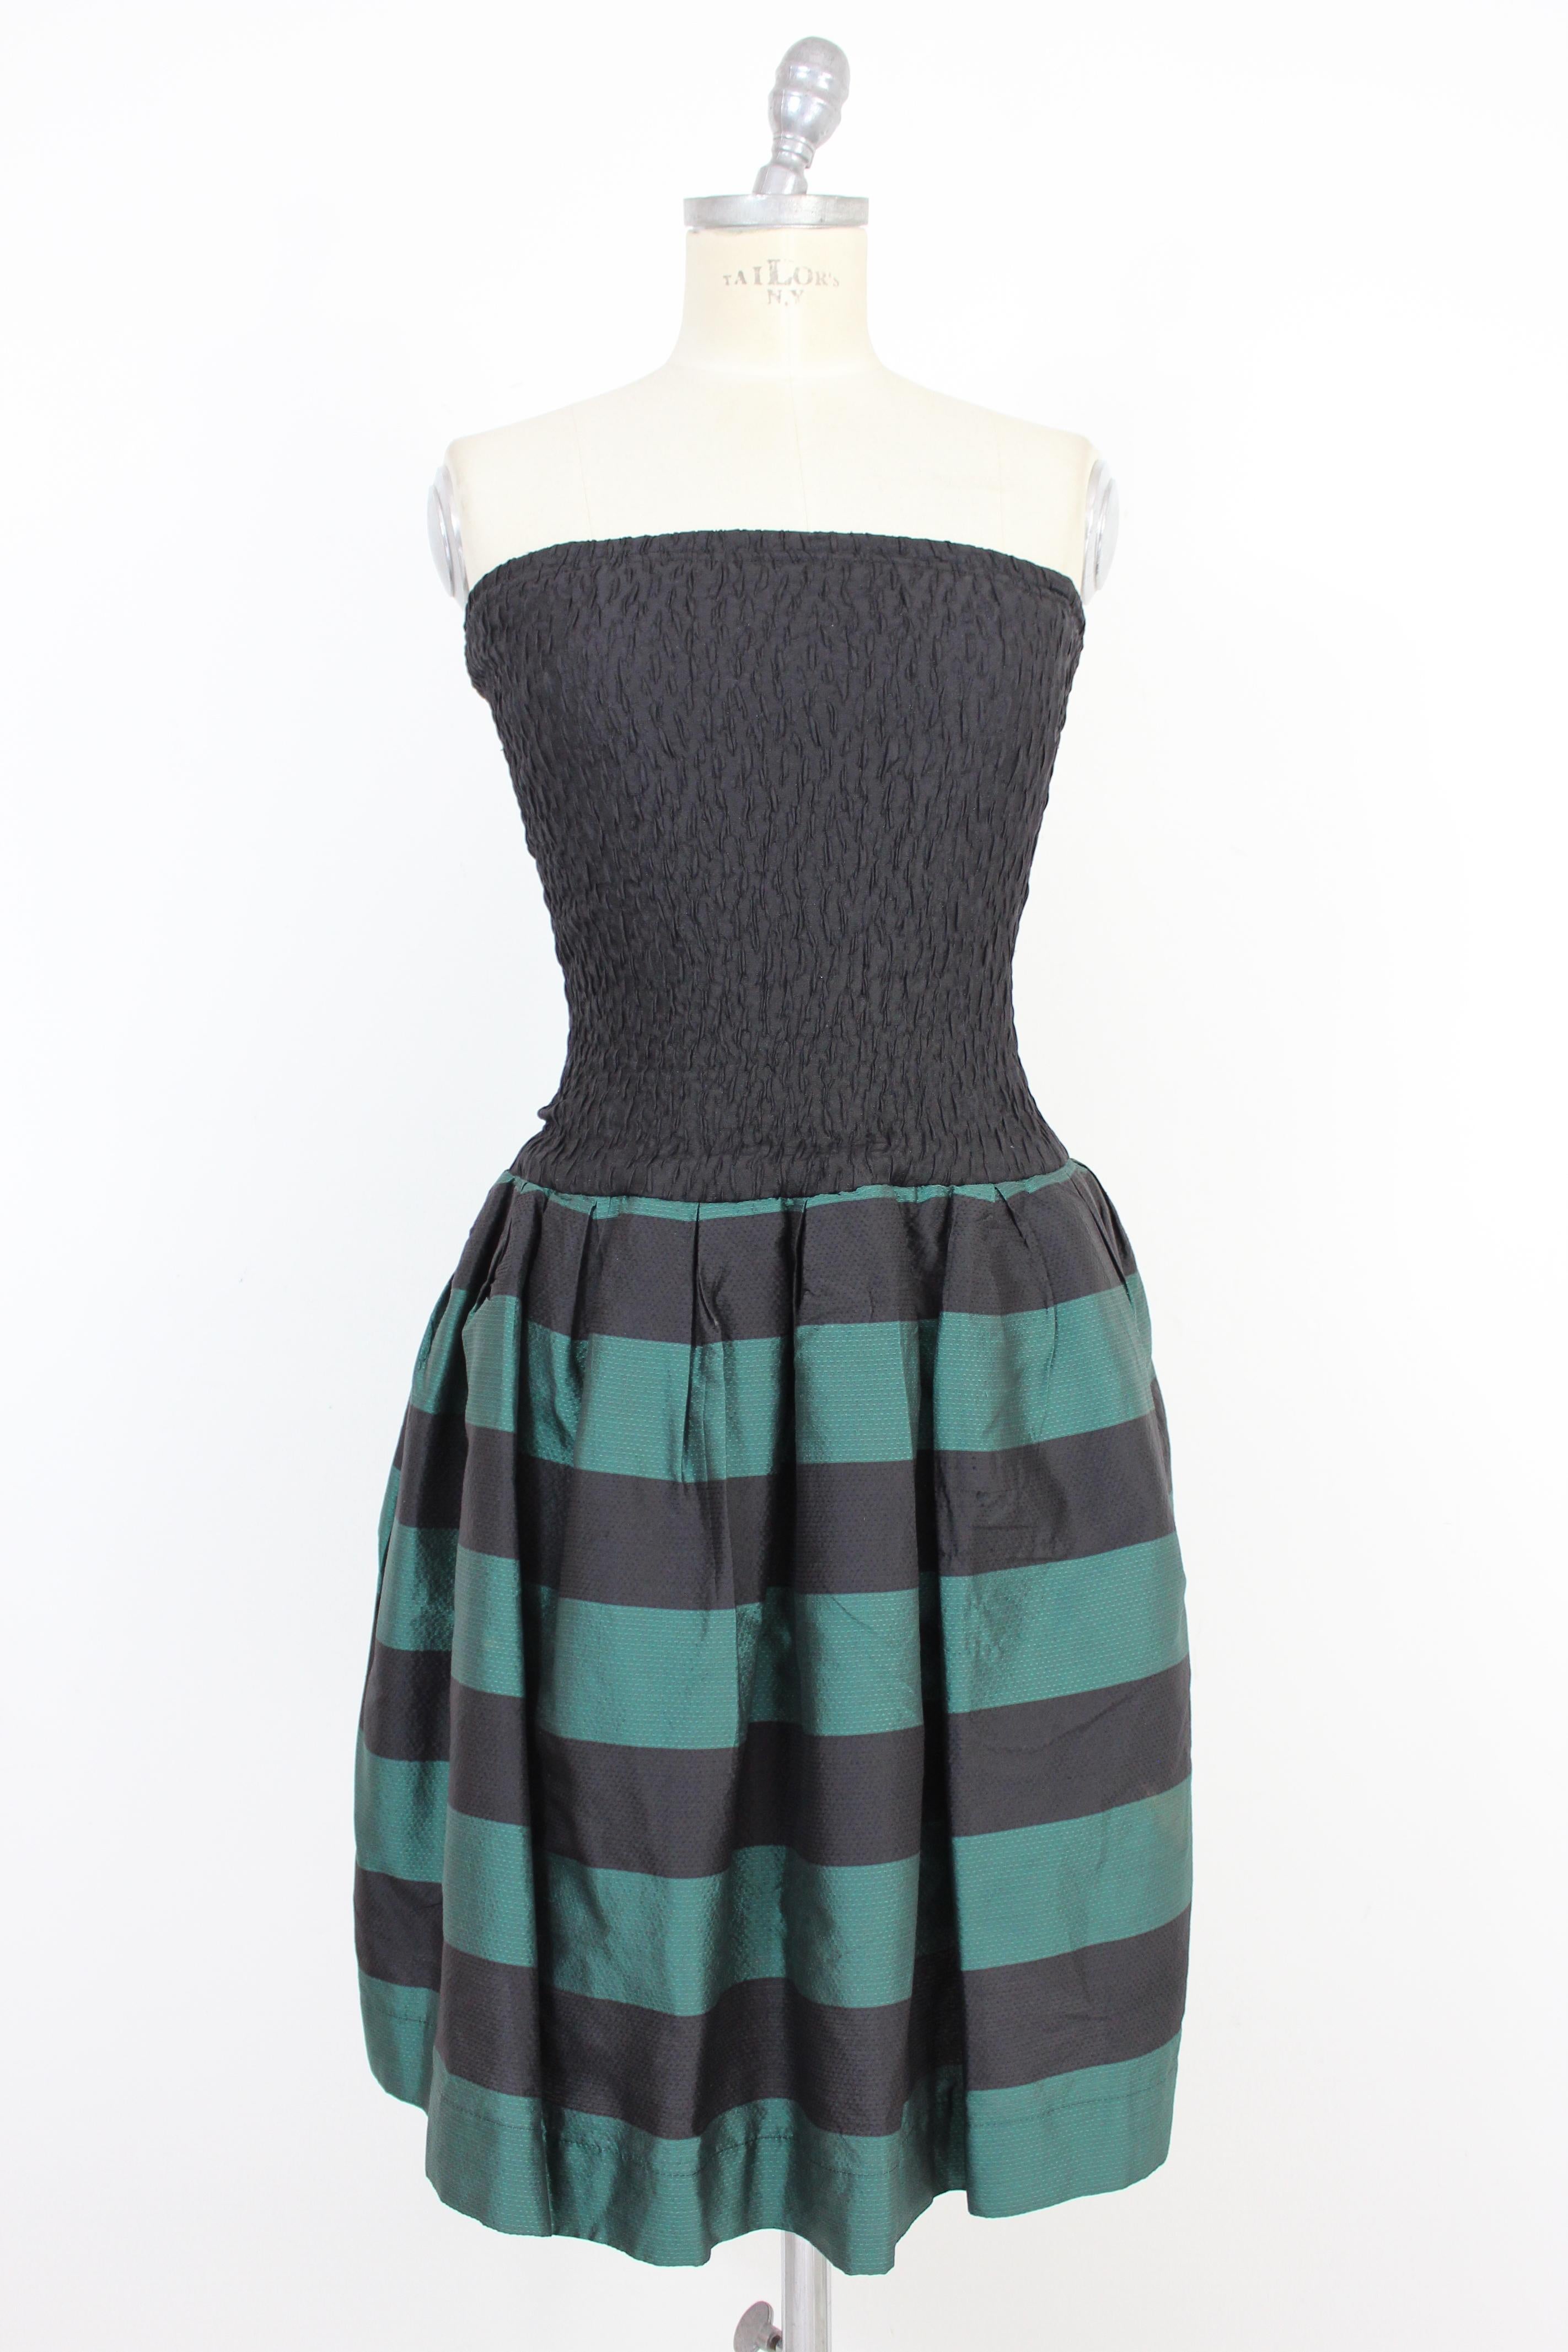 Byblos 90s vintage woman dress. Short dress, black elastic bodice, green and black striped balloon skirt. Pockets on the hips. Bodice fabric 80% silk 20% elastomer, the fabric of the skirt 100% silk. Internally lined 100% cotton. Made in